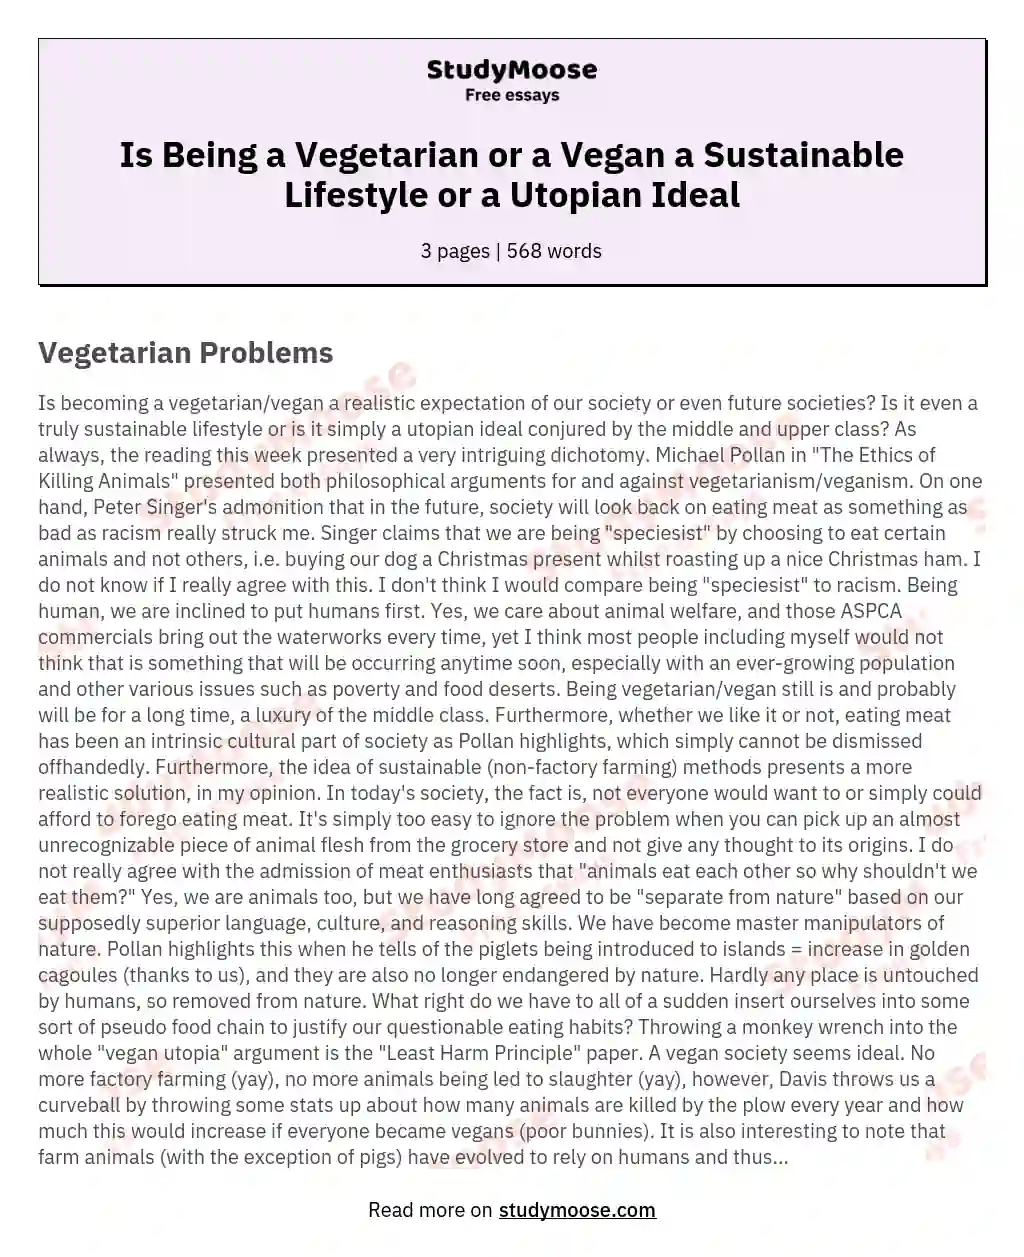 Is Being a Vegetarian or a Vegan a Sustainable Lifestyle or a Utopian Ideal essay